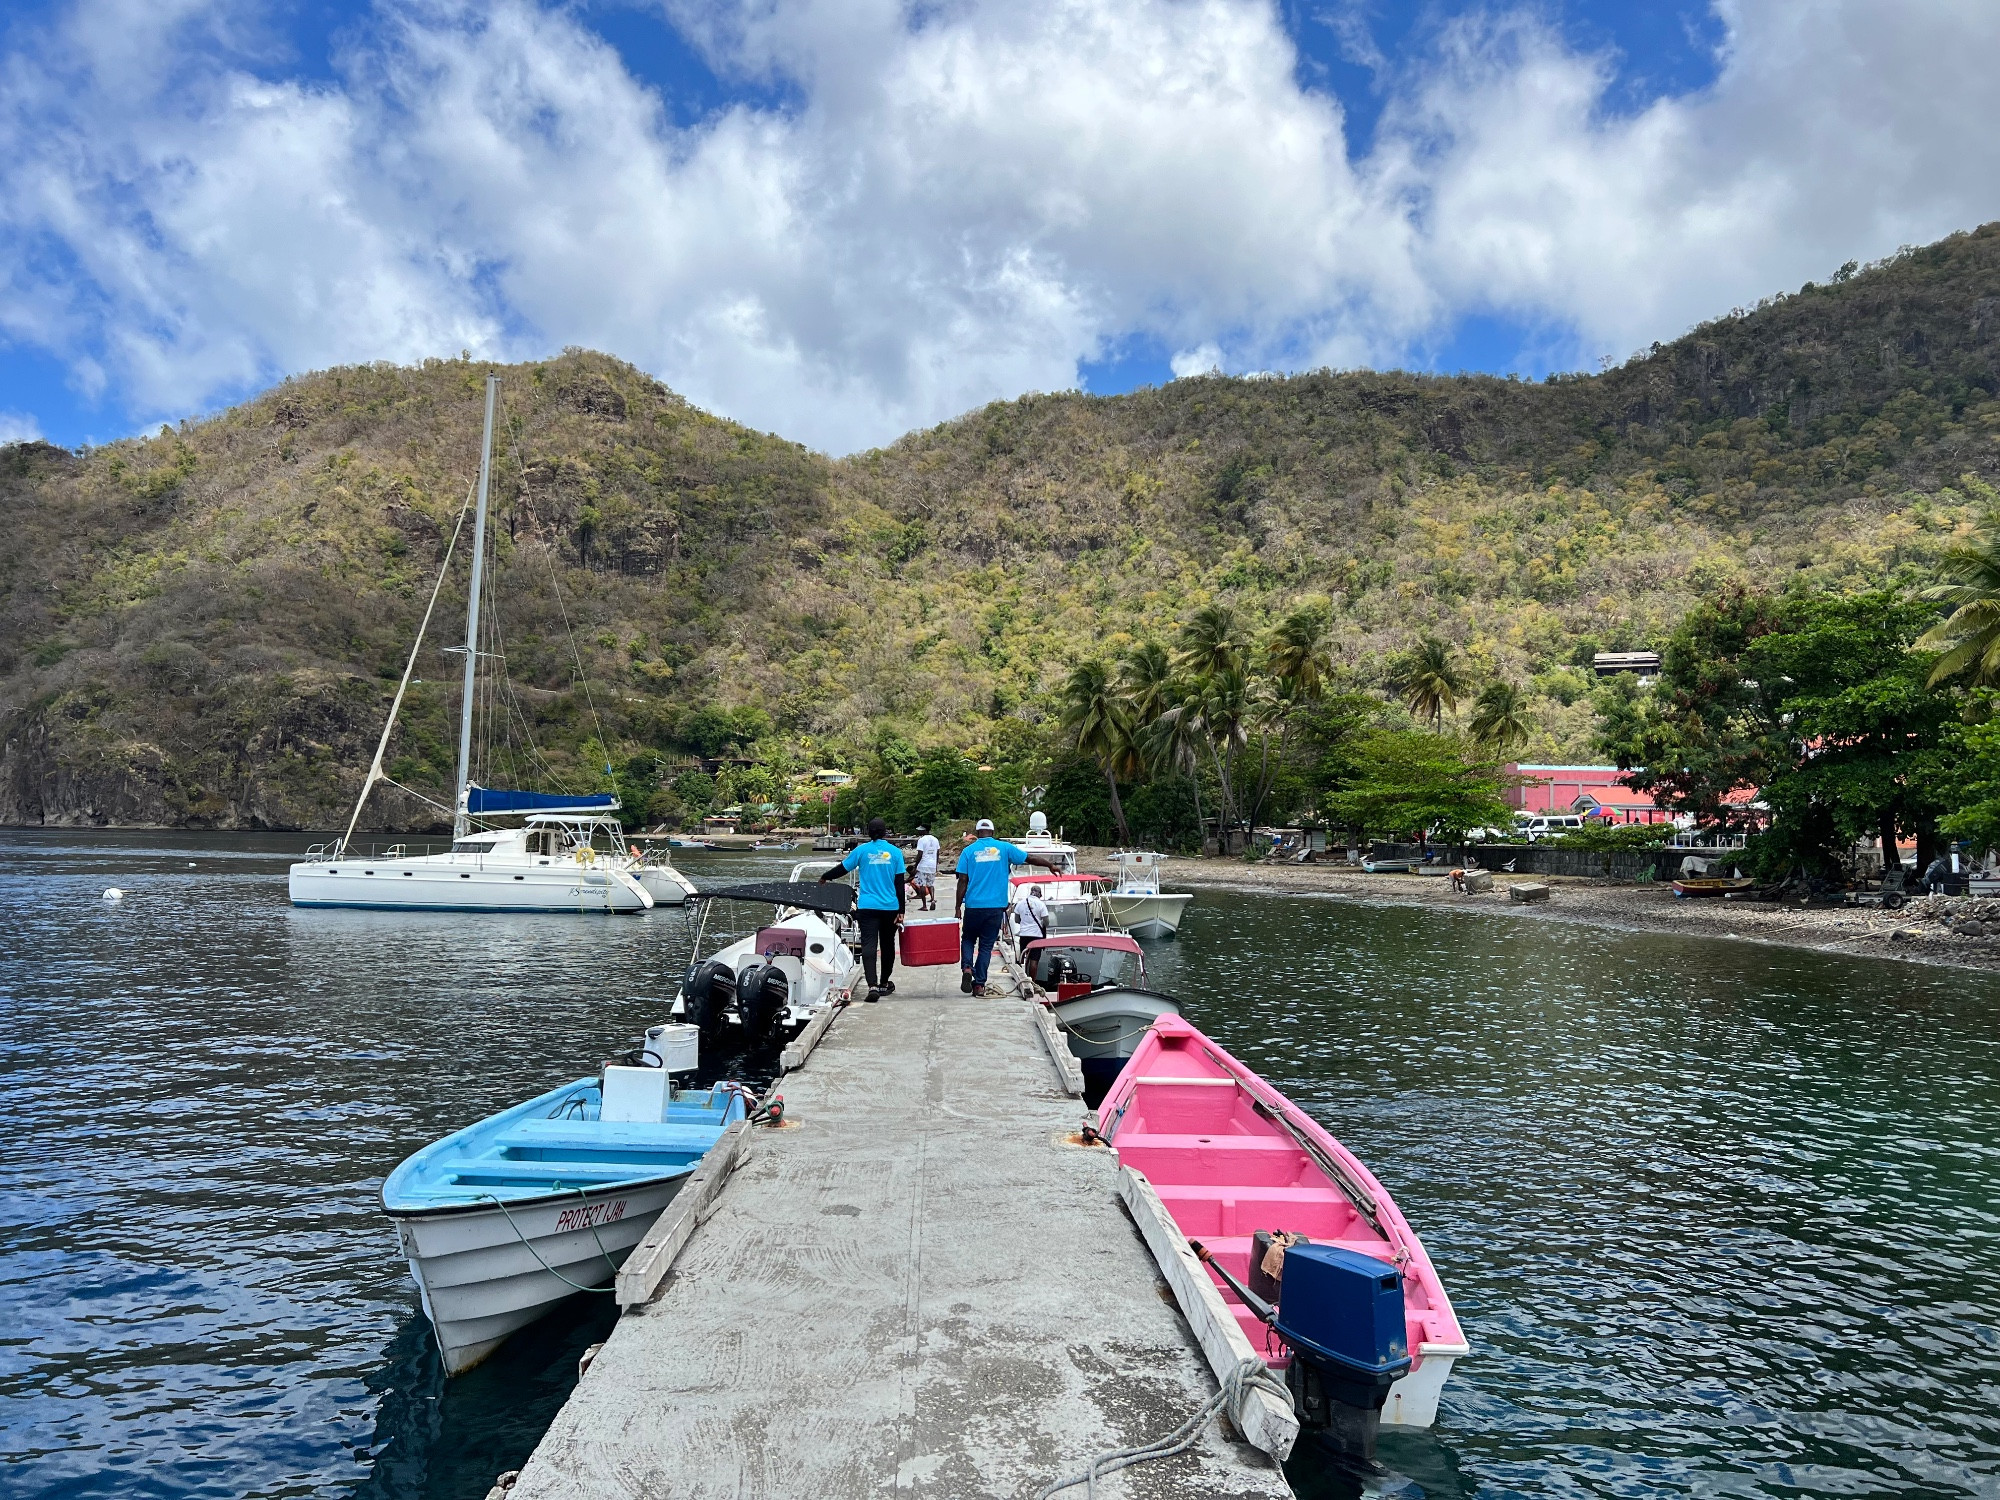 Marina of Soufriere